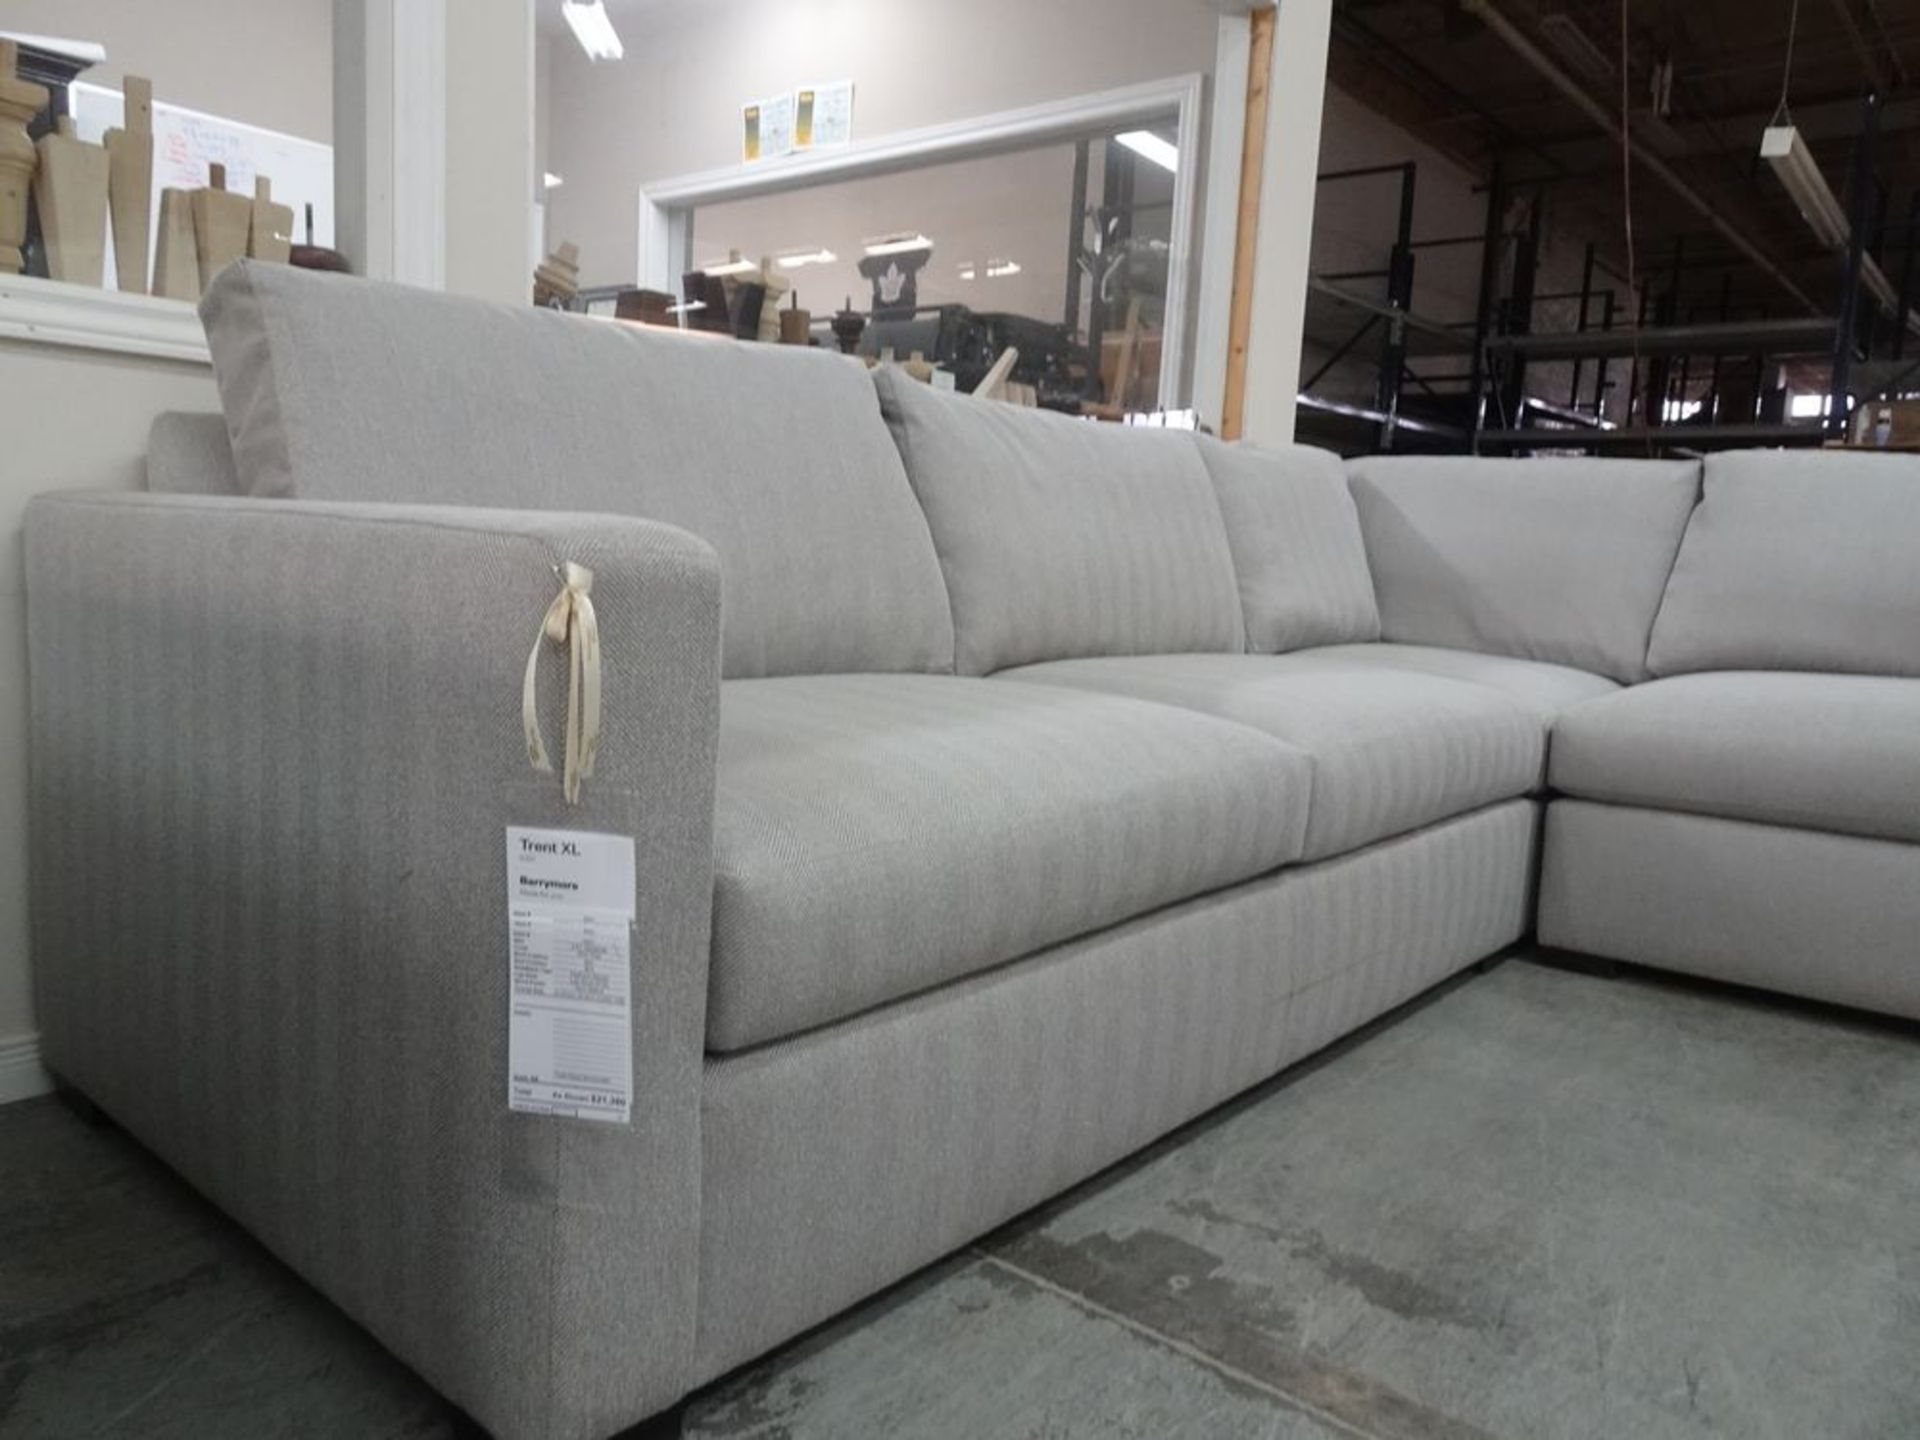 3 PIECE SECTIONAL SOFA - PALE GRAY - Image 2 of 4